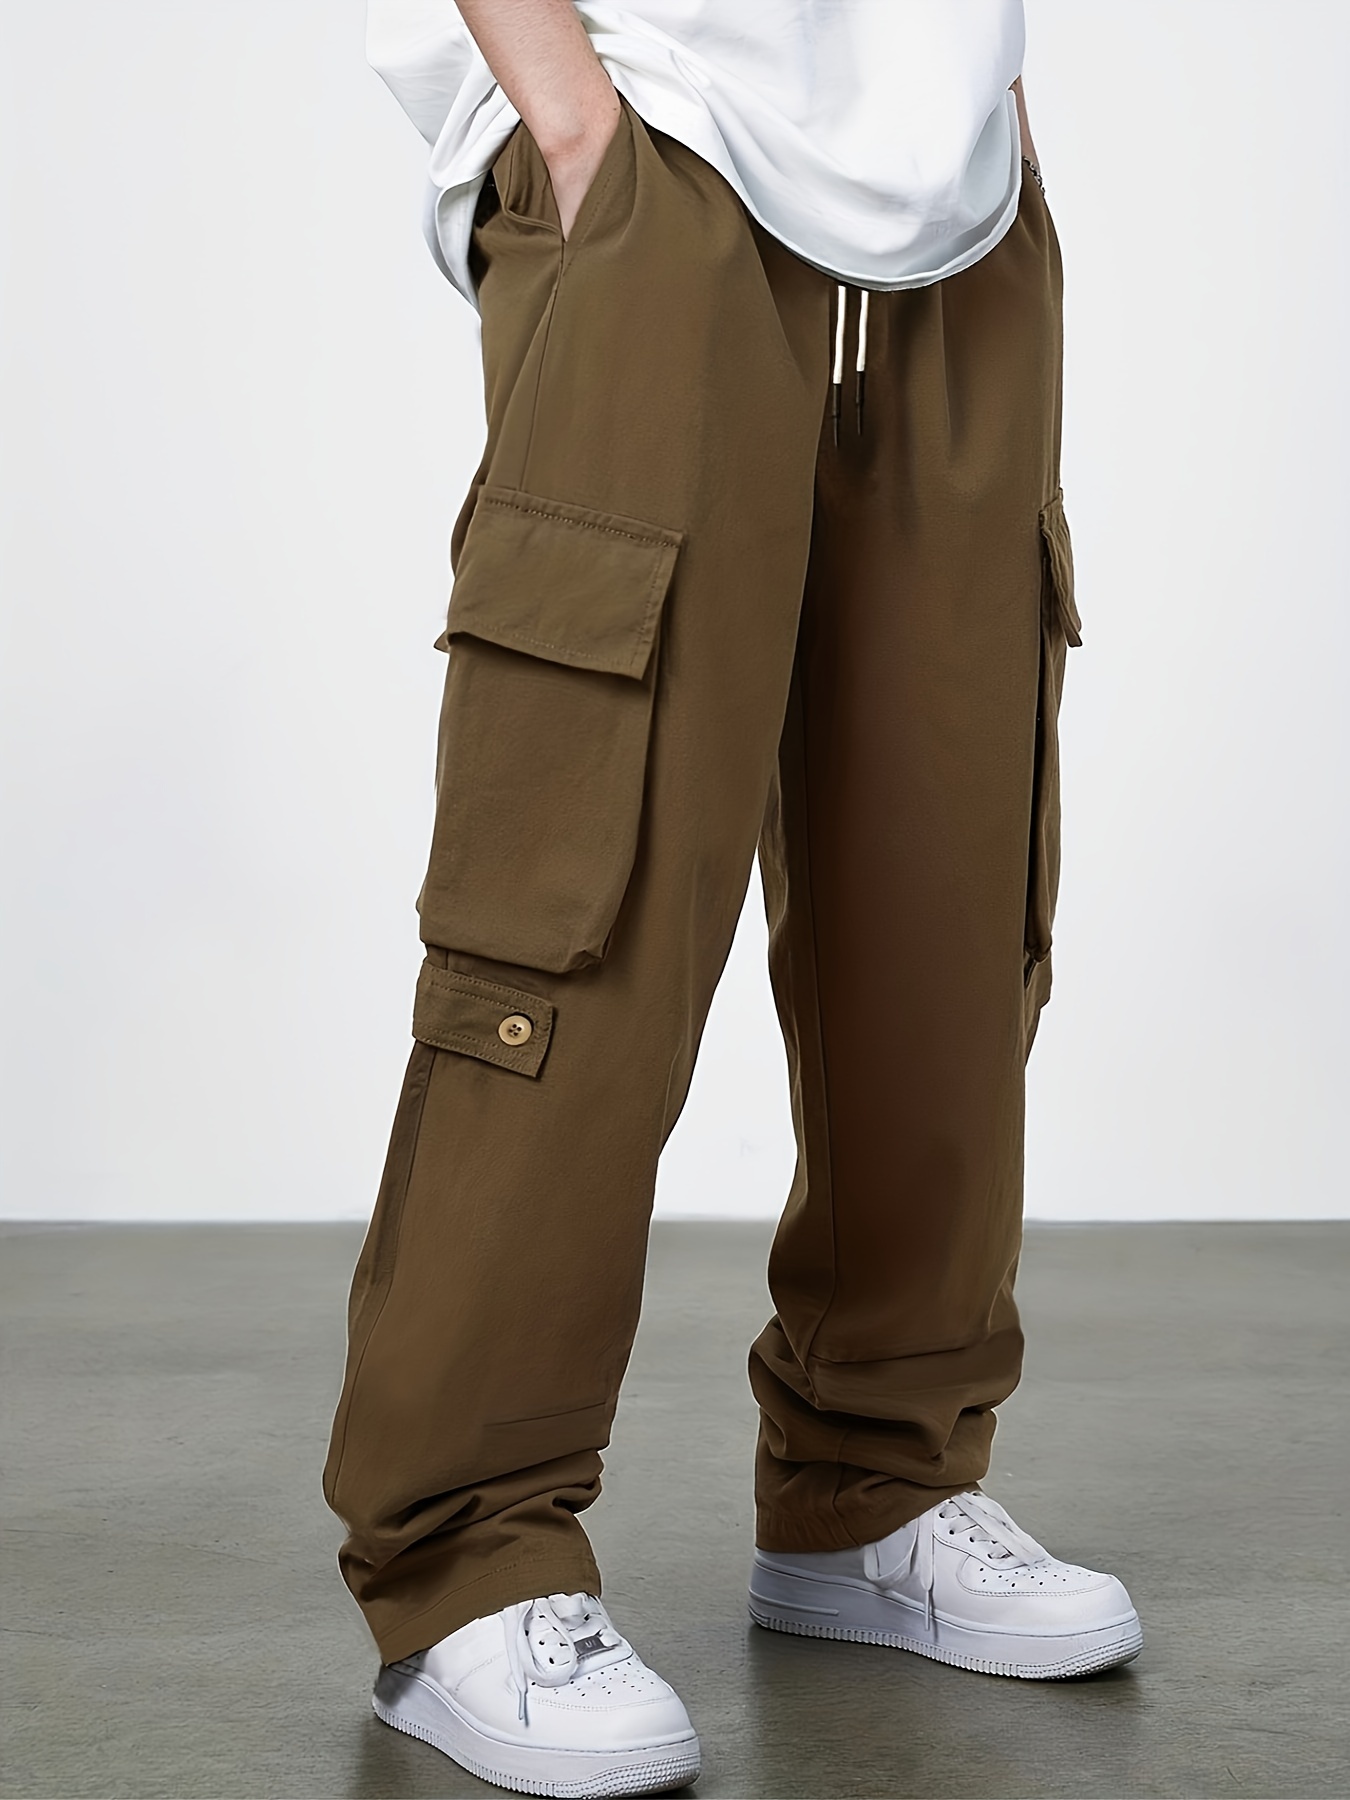 Cargo Pants Women Fashion Solid Color High Waisted Drawstring With